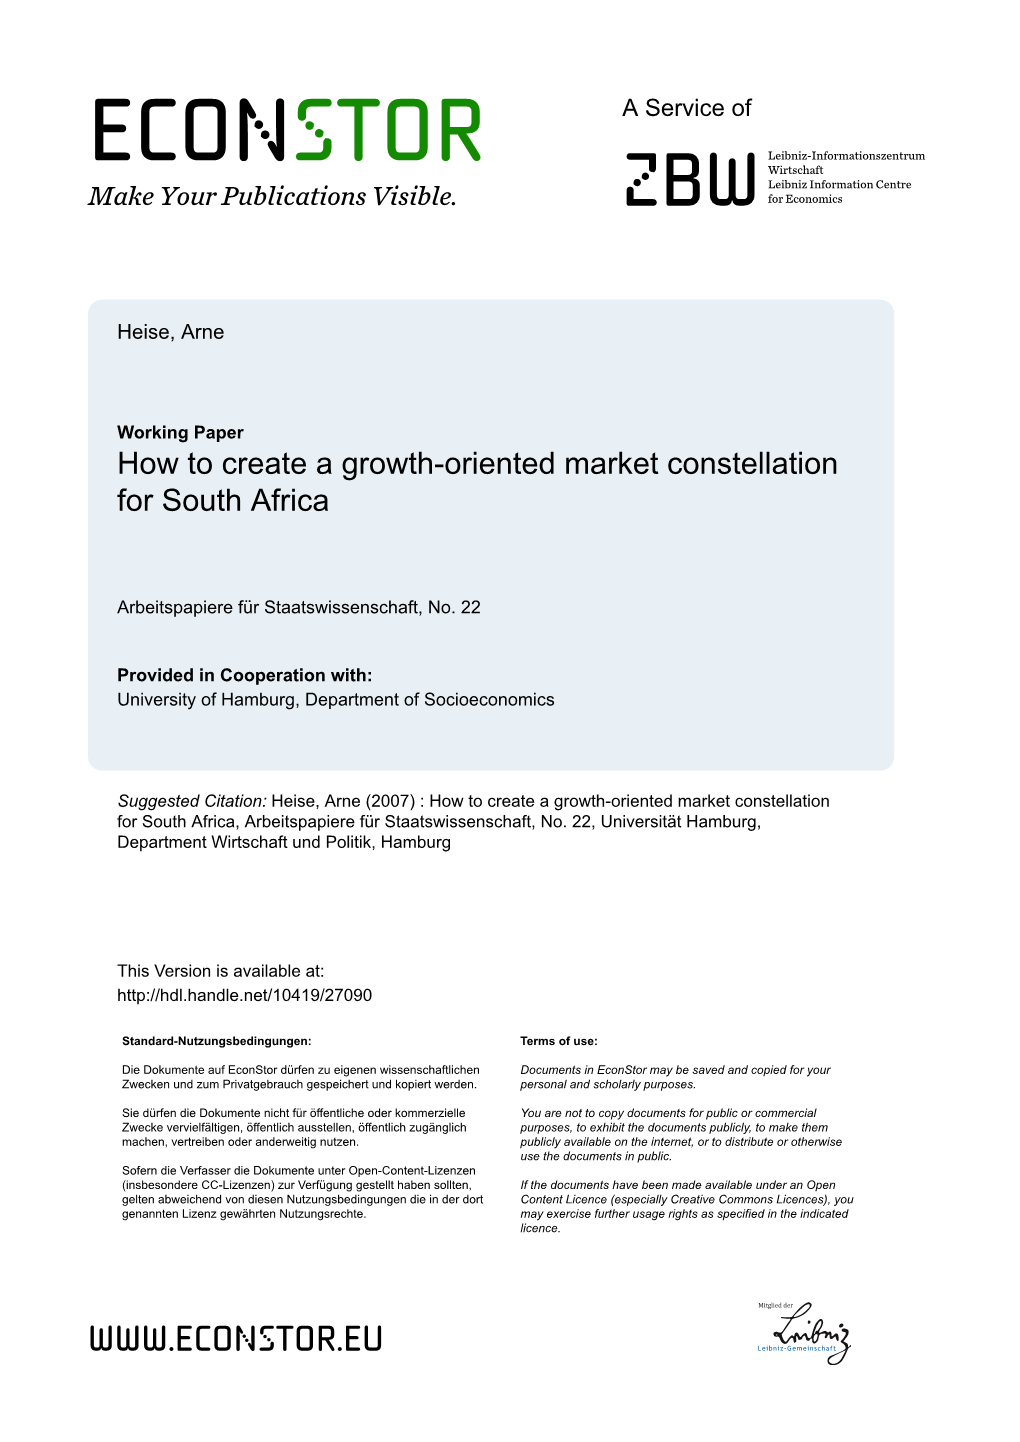 How to Create a Growth-Oriented Market Constellation for South Africa